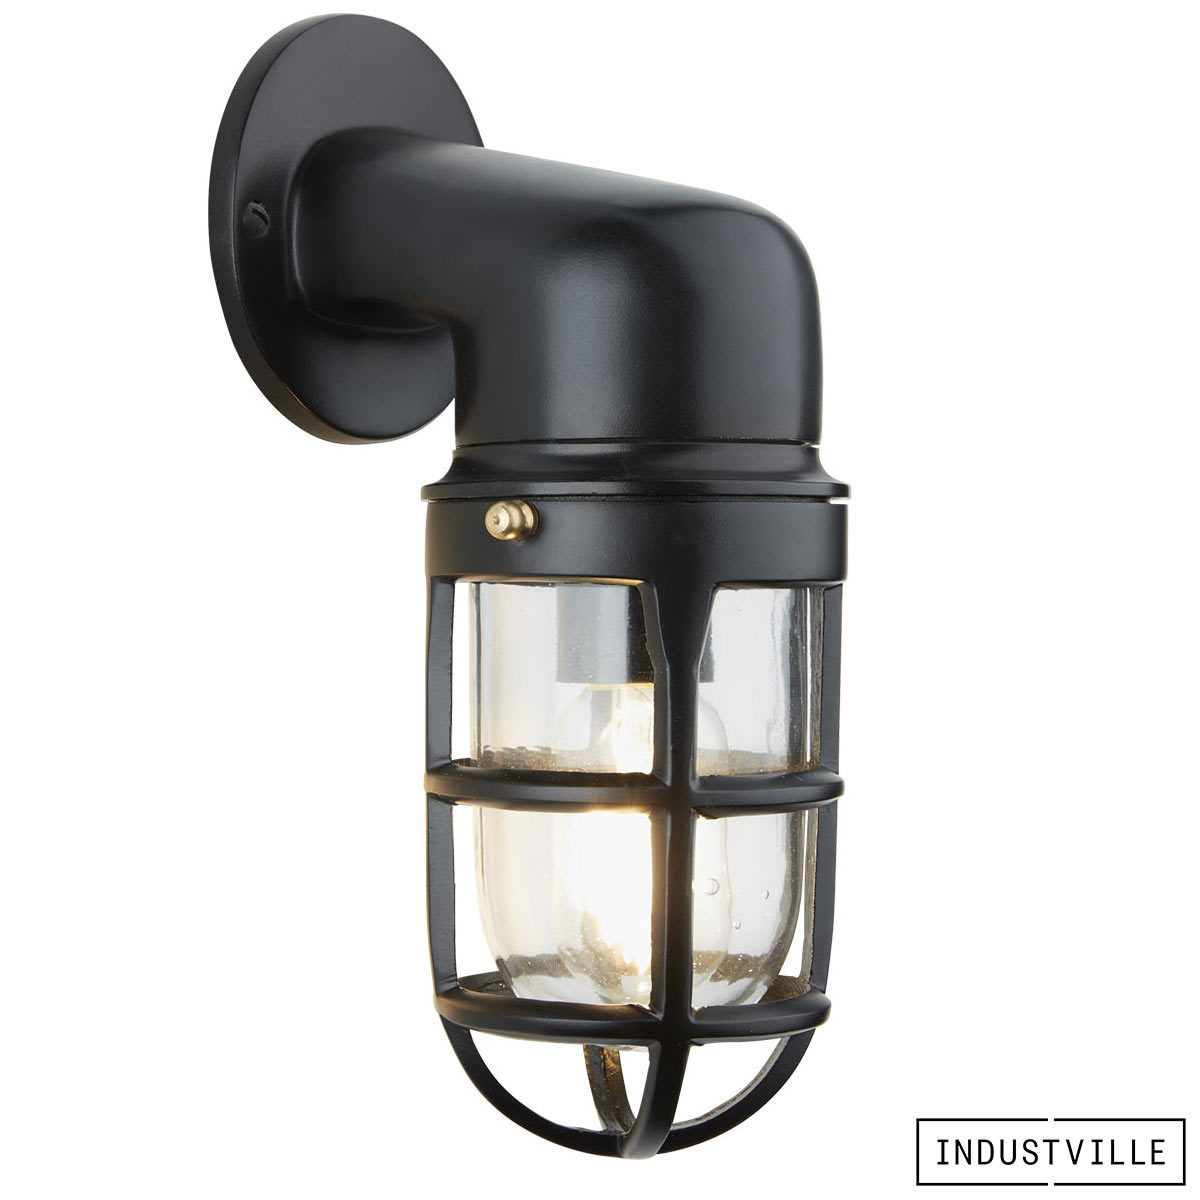 Industville Bulkhead 12 Outdoor And Bathroom Sconce Wall Light In 2 Colours Costco Uk